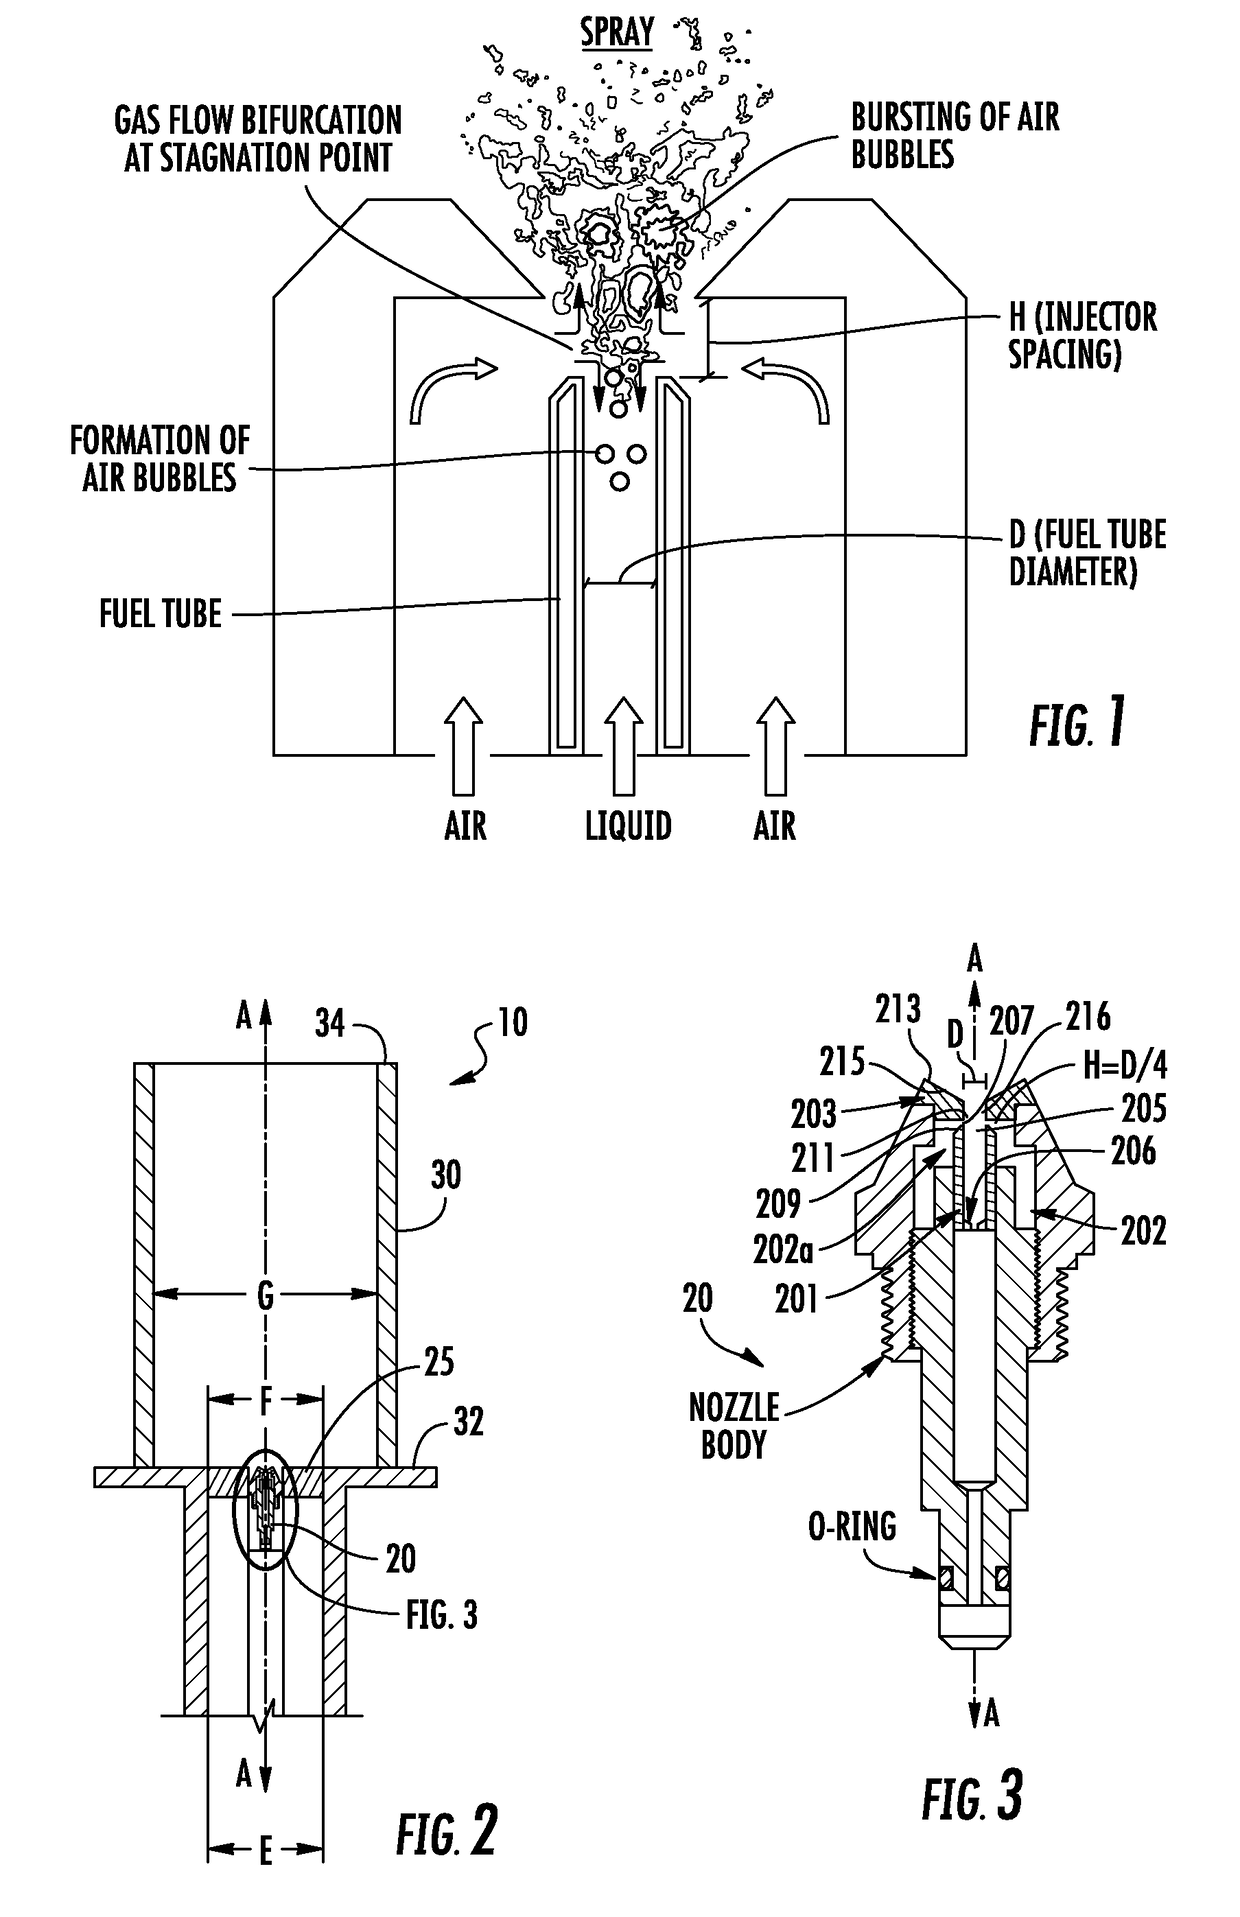 Combustor assembly for low-emissions and alternate liquid fuels